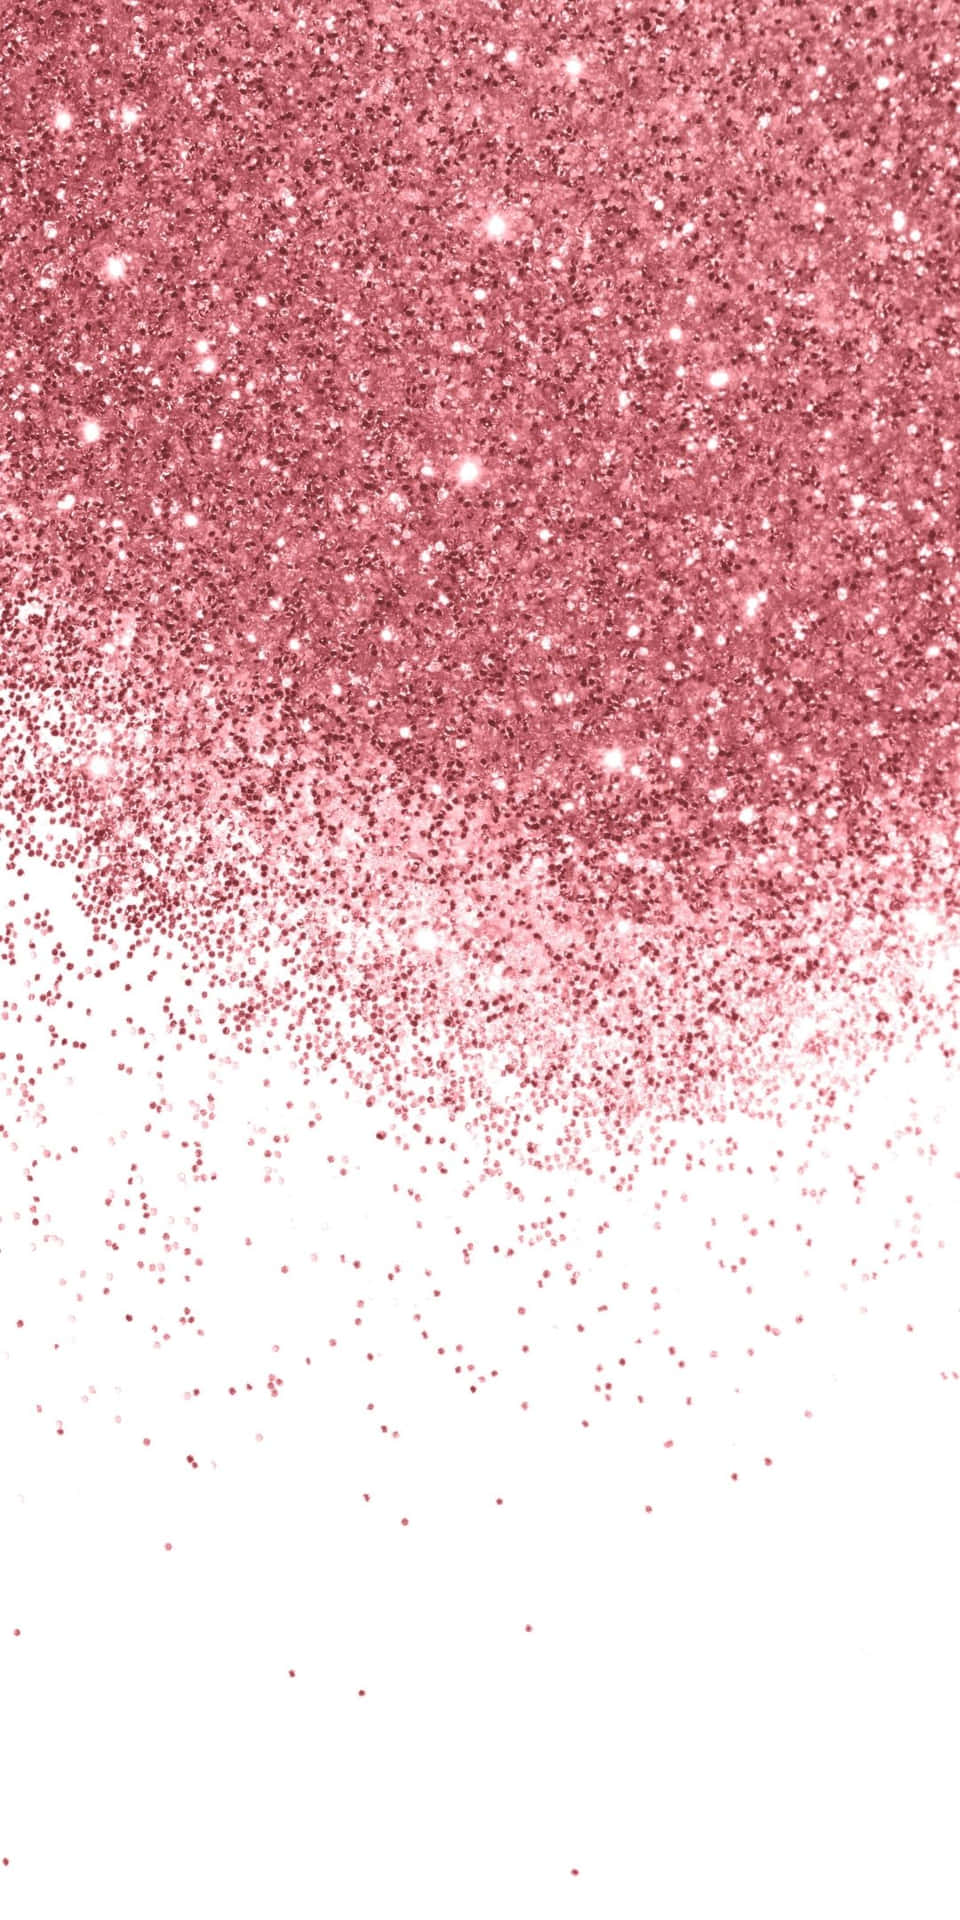 Sparkly Pink Powder On White Surface Background